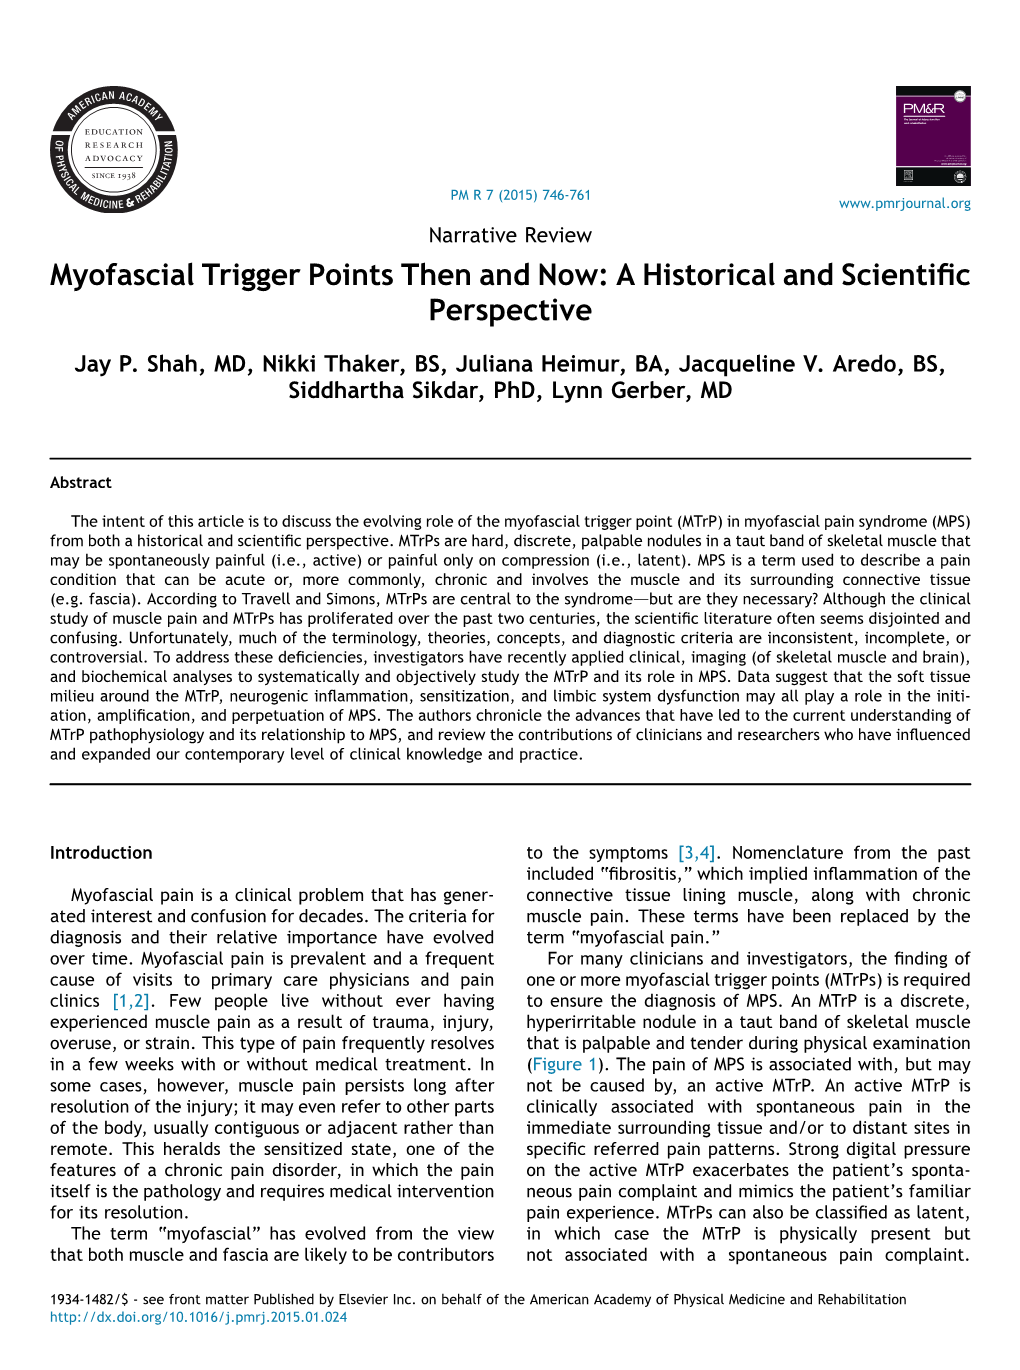 Myofascial Trigger Points Then and Now: a Historical and Scientiﬁc Perspective